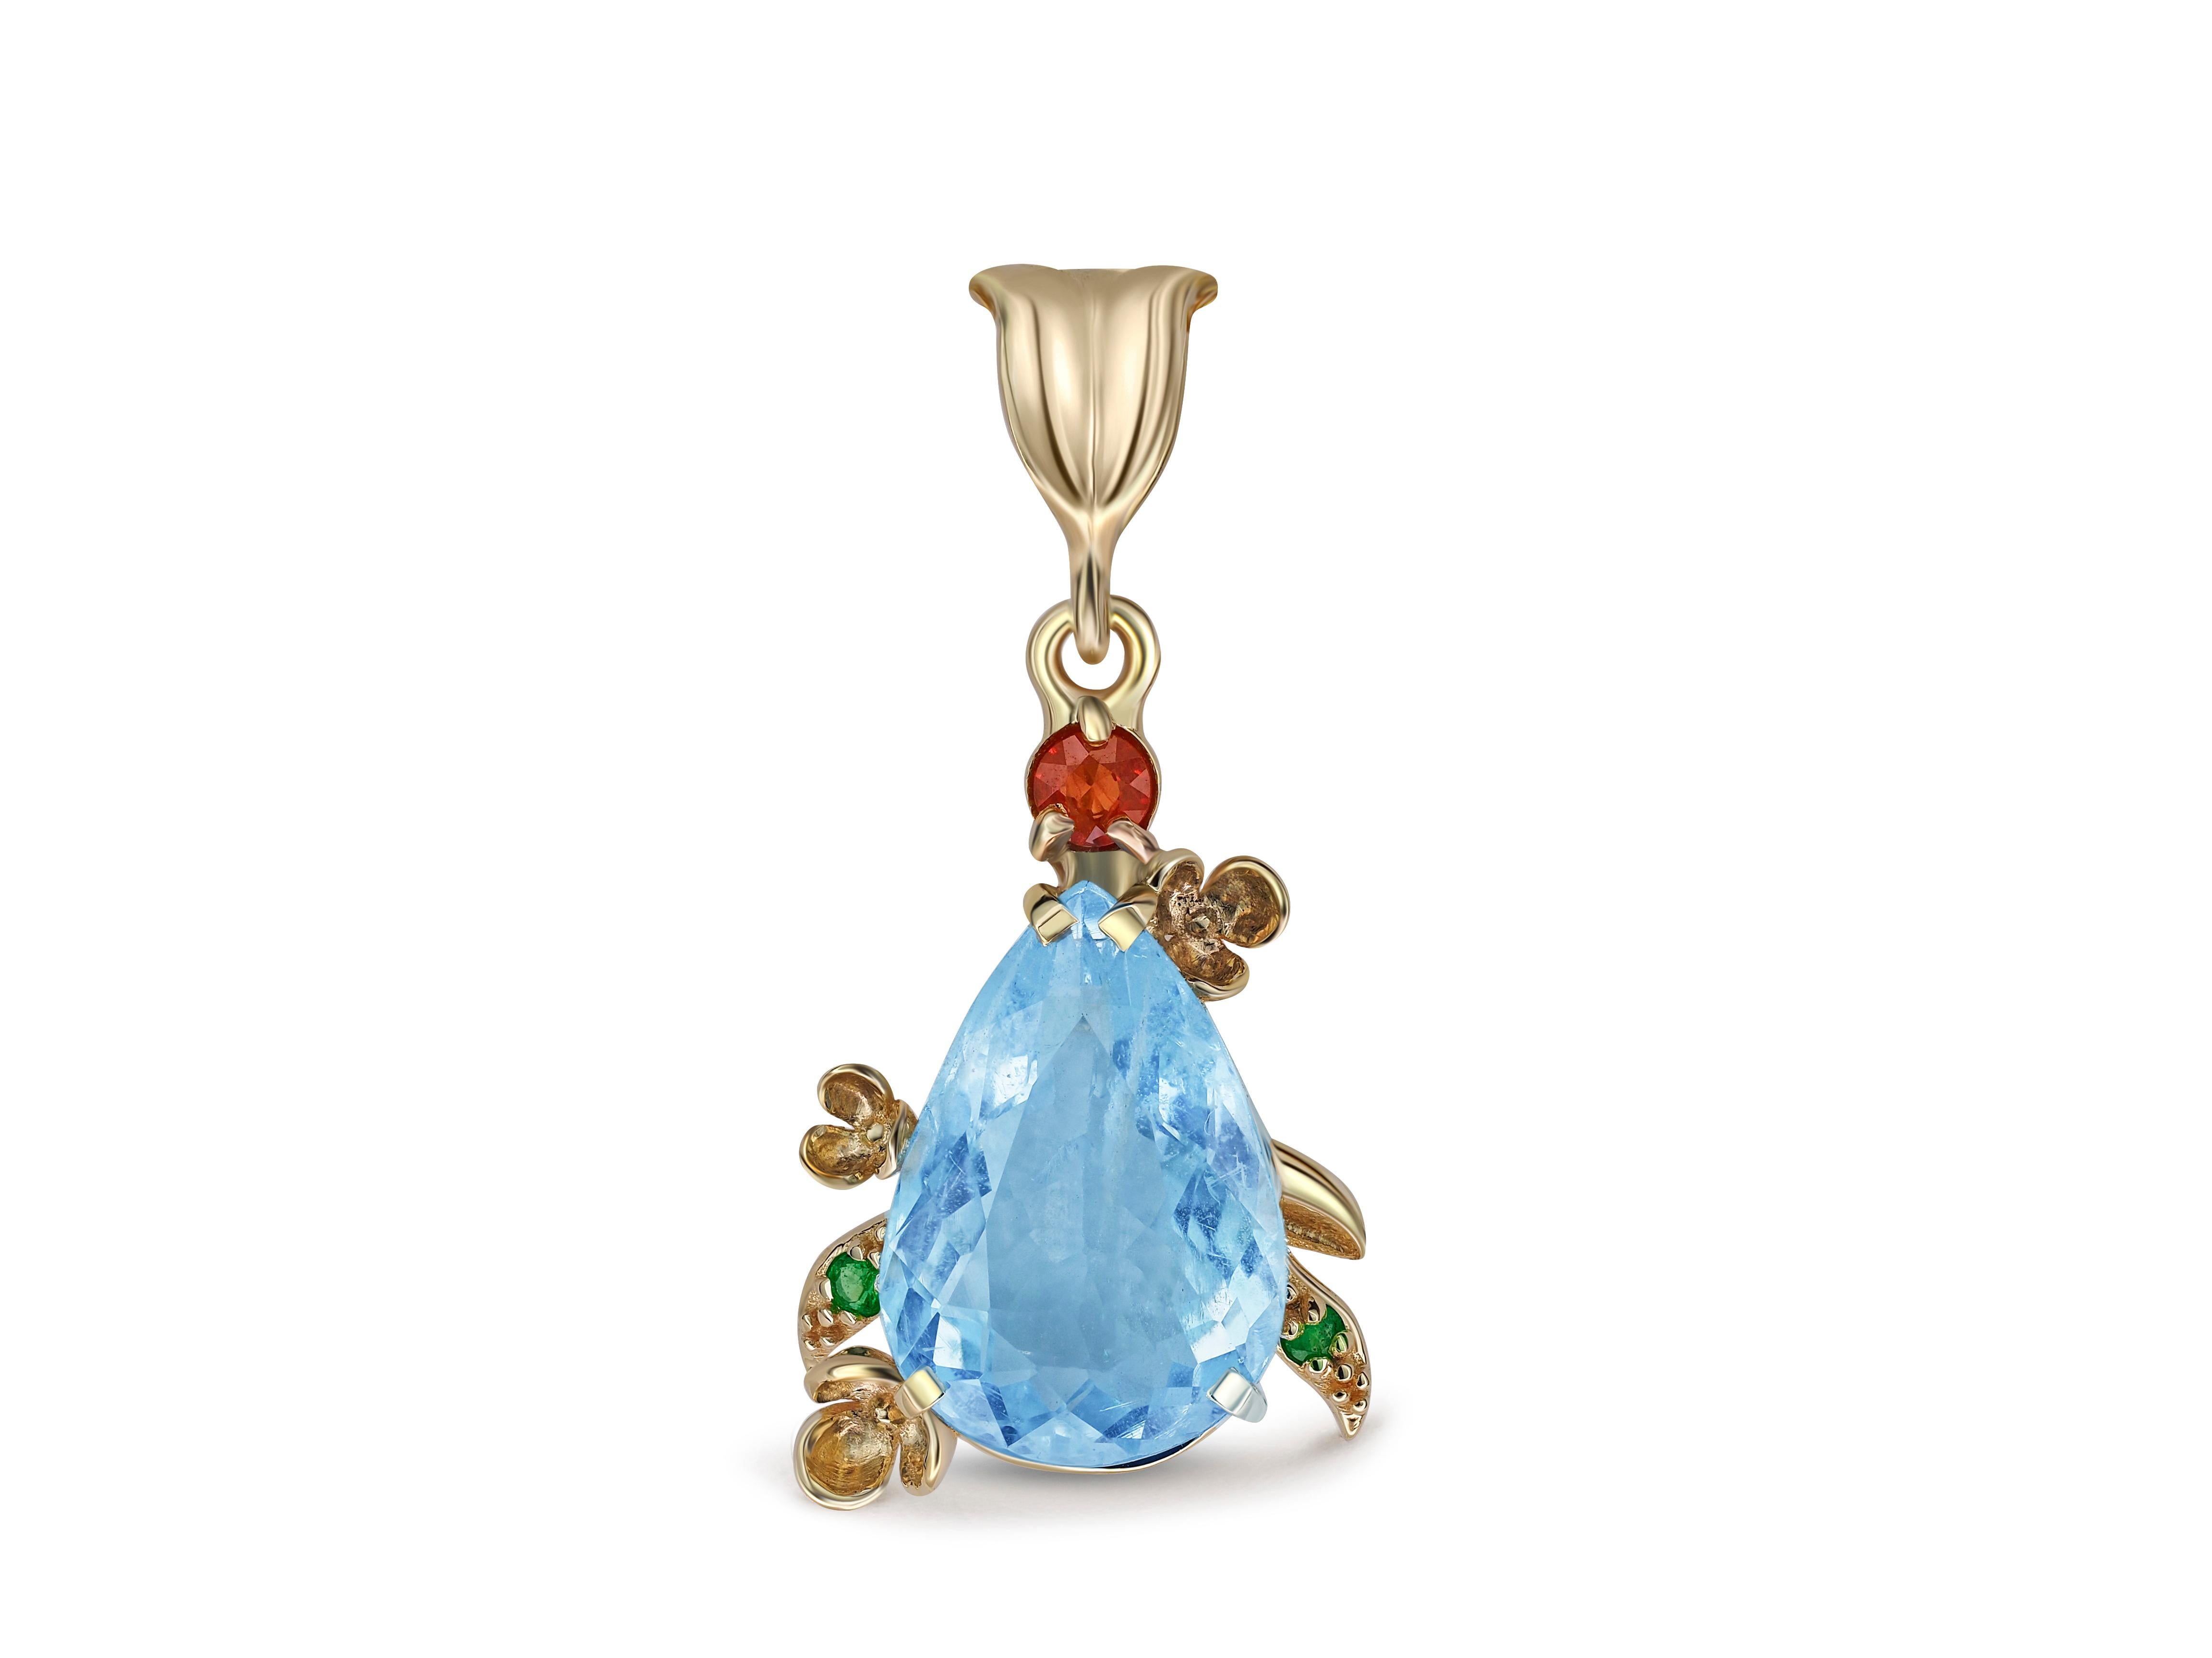 Pear Topaz Pendant in 14 Karat Gold. 
Flower design pendant with natural topaz. Topaz gold pendant. November birthstone pendant.

Metal: 14k gold
Weight: 2.75 g.
Pendant size: 30x14.5 mm.

Set with topaz, color - sky blue
Pear cut, aprox 5 ct